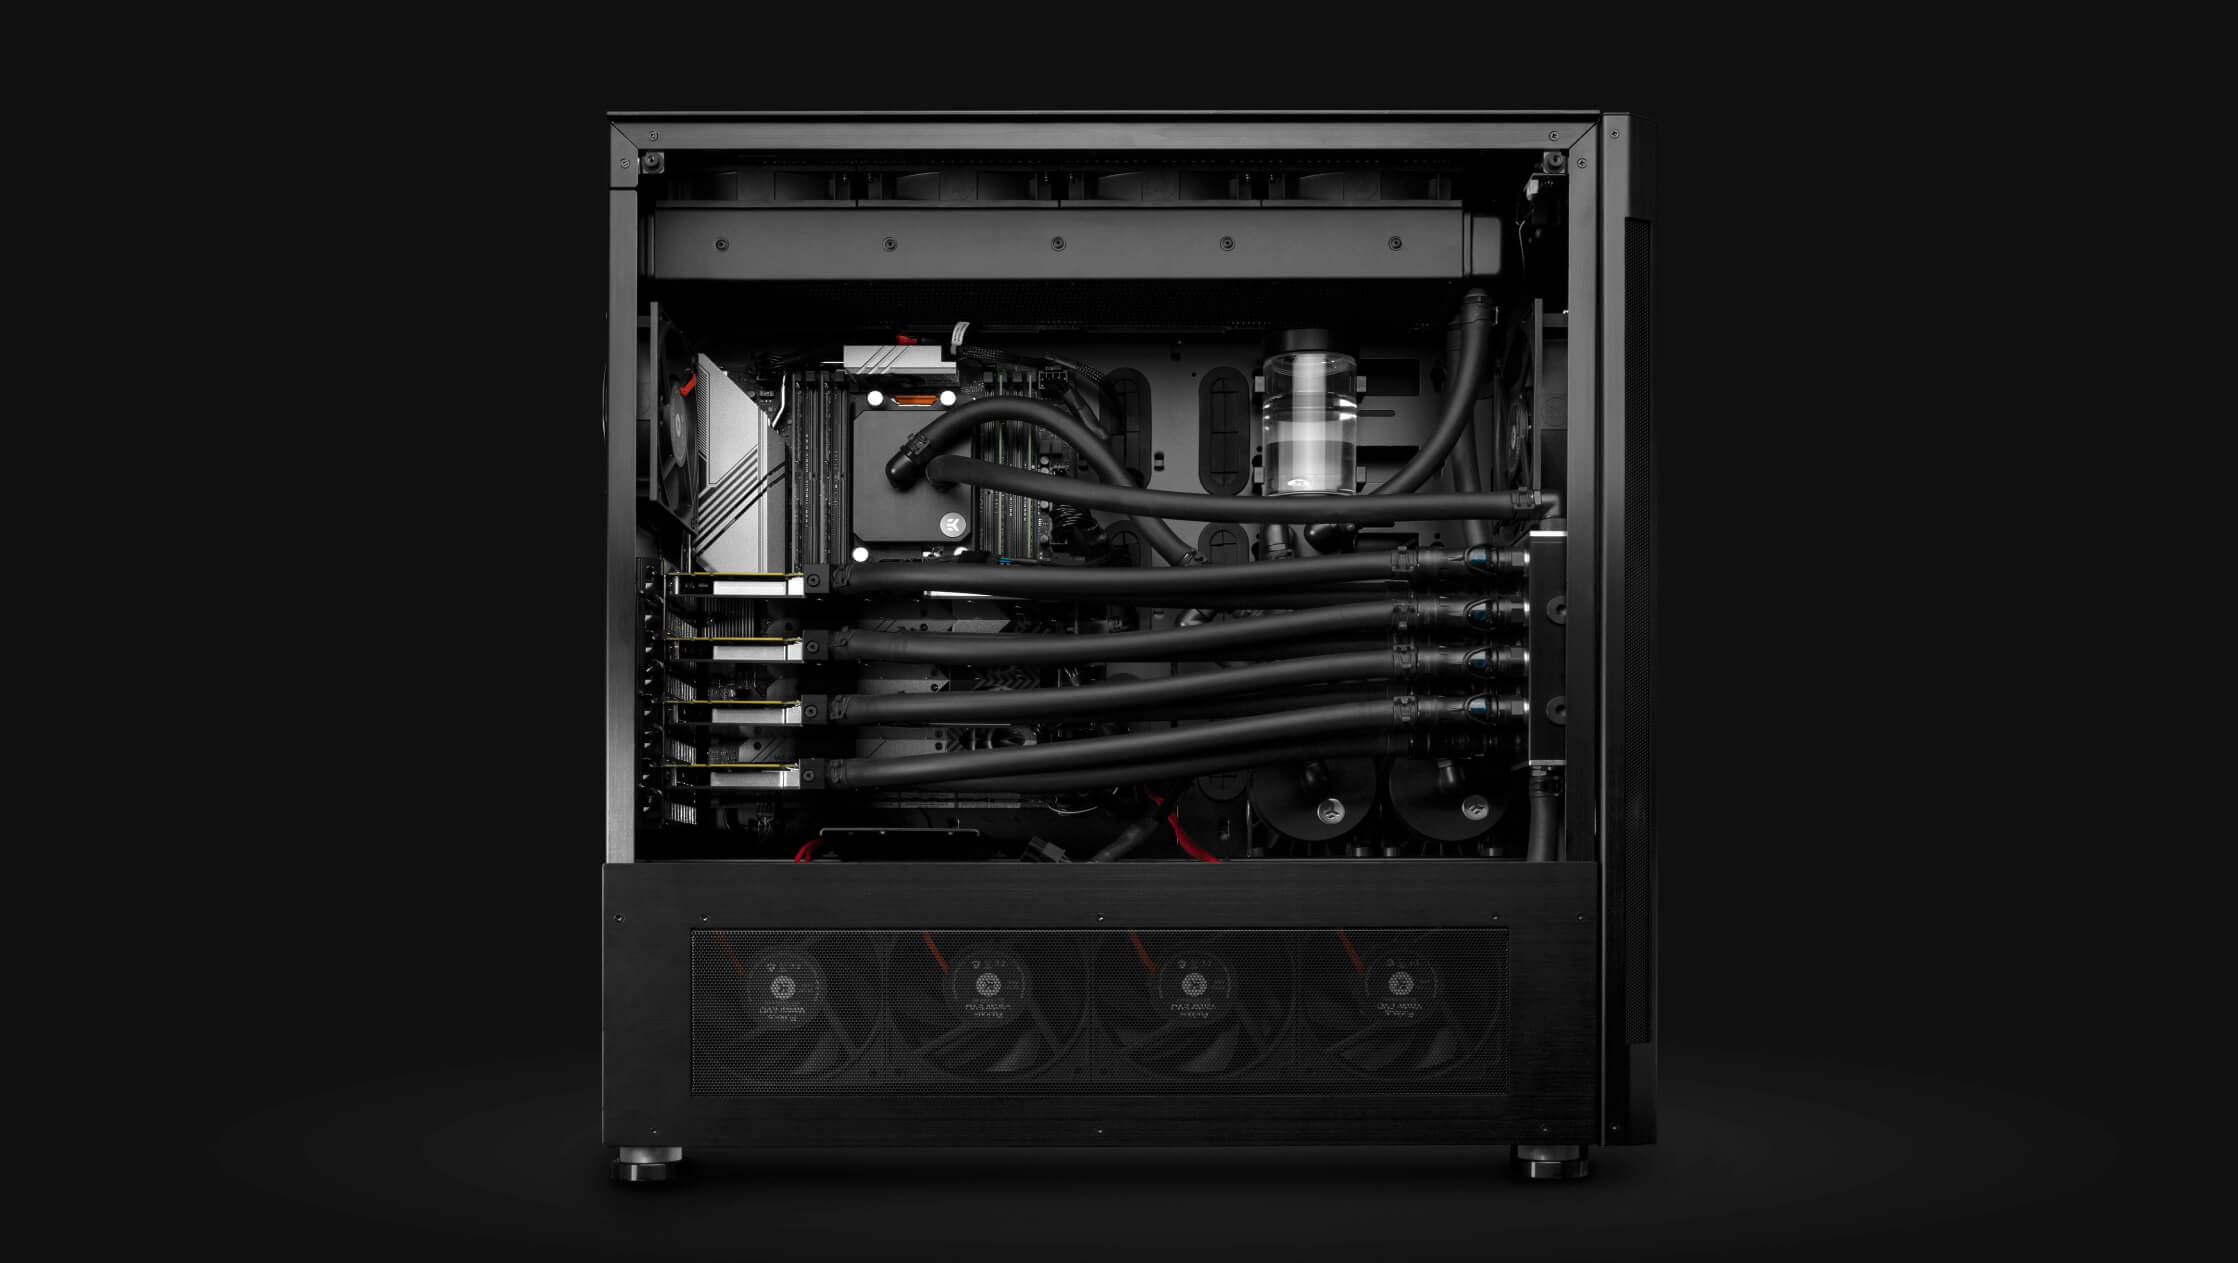 EK-Fluid Works Studio Series S5000 workstation with 4 GPUs and high-performance CPU – well beyond CAD hardware requirements